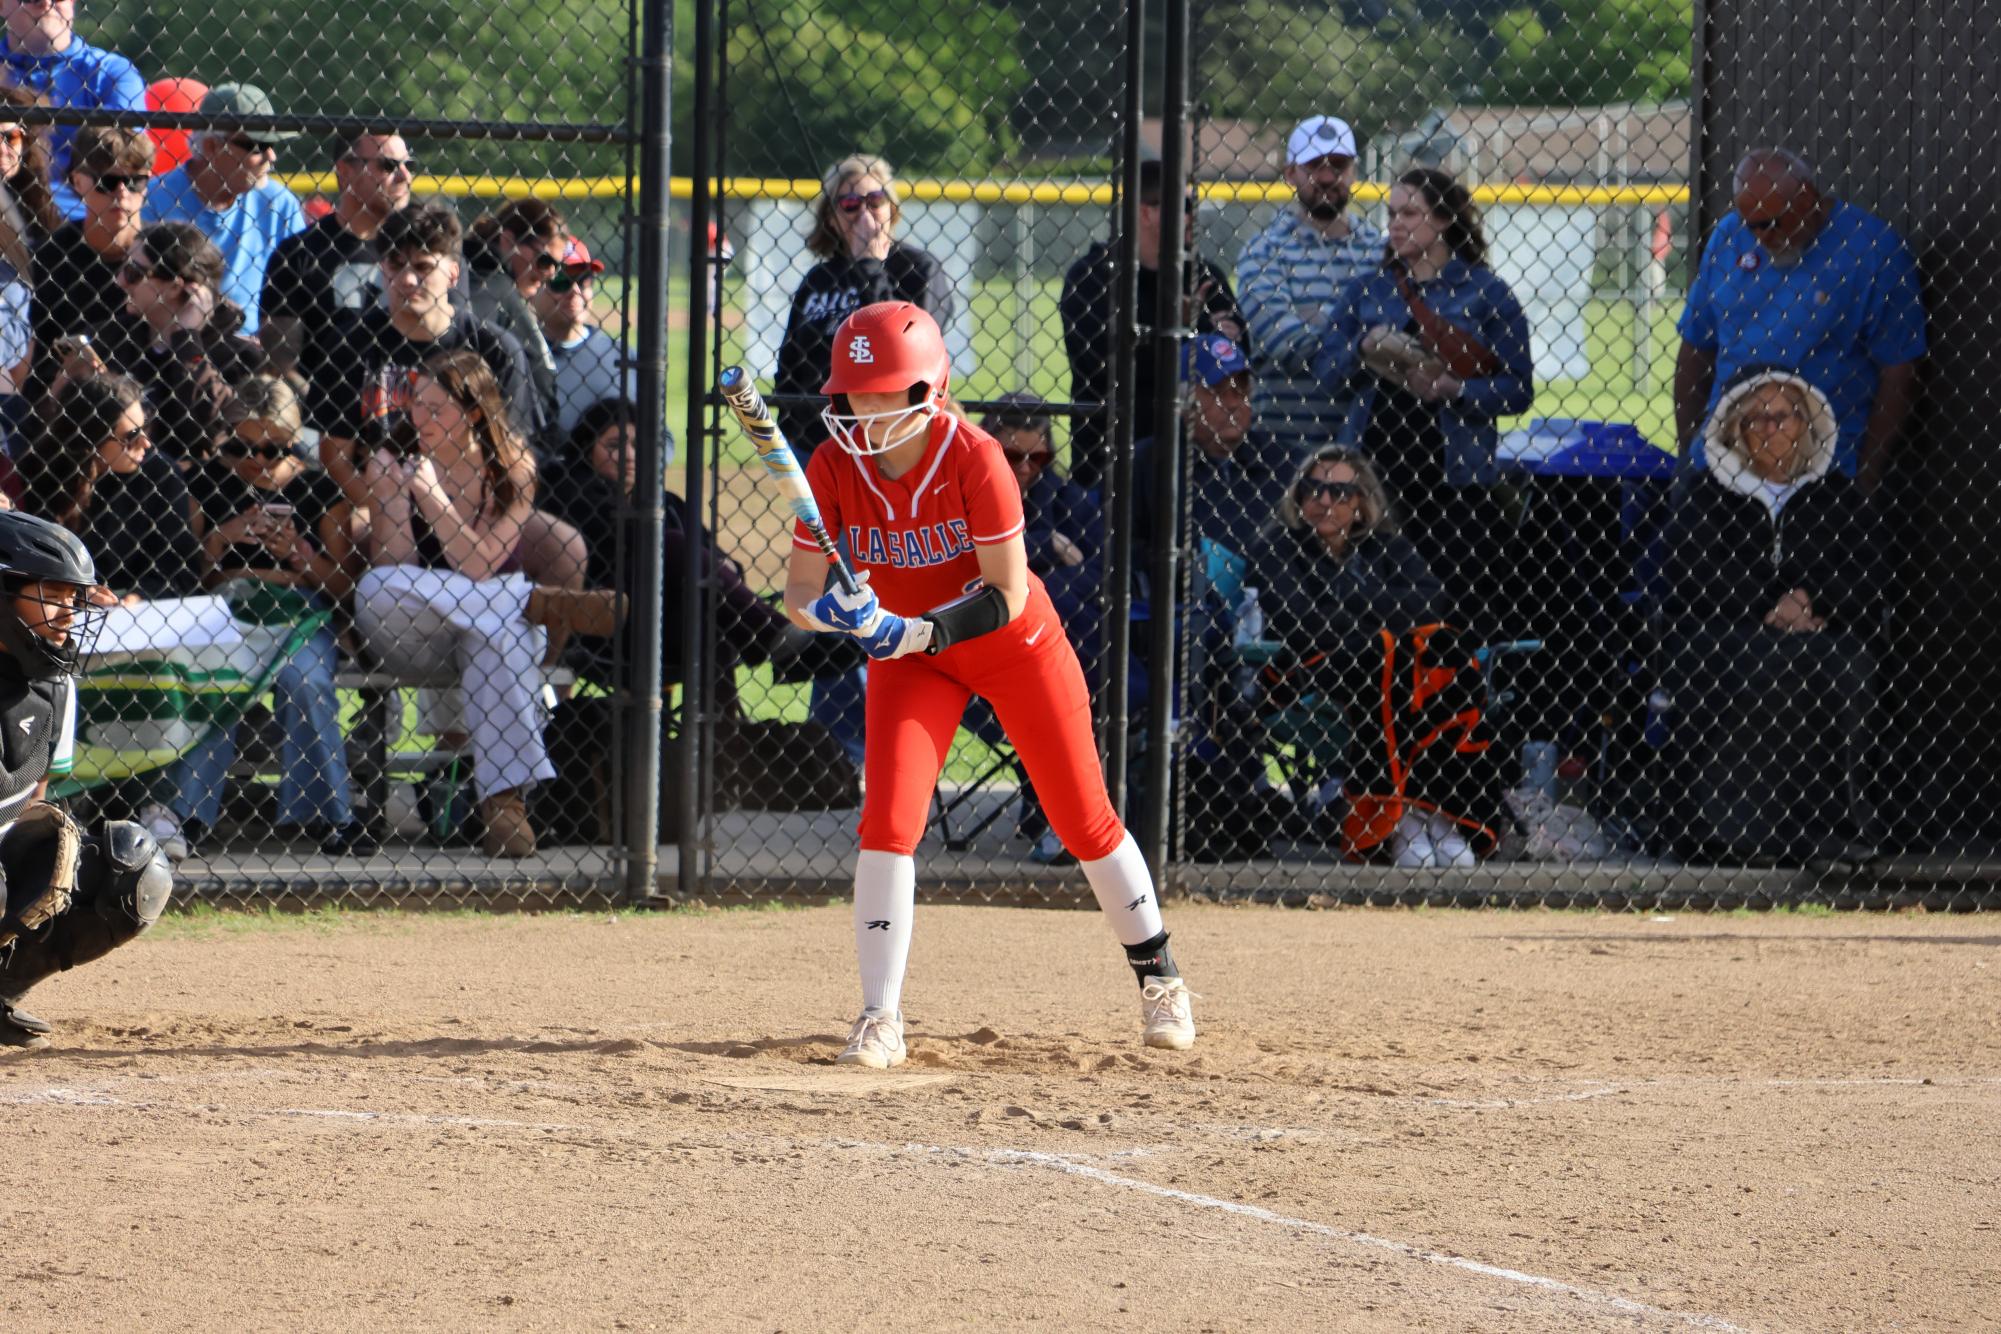 Photo+Story%3A+La+Salle%E2%80%99s+Softball+Senior+Night+Ends+With+Triumphant+Victory+Against+Parkrose